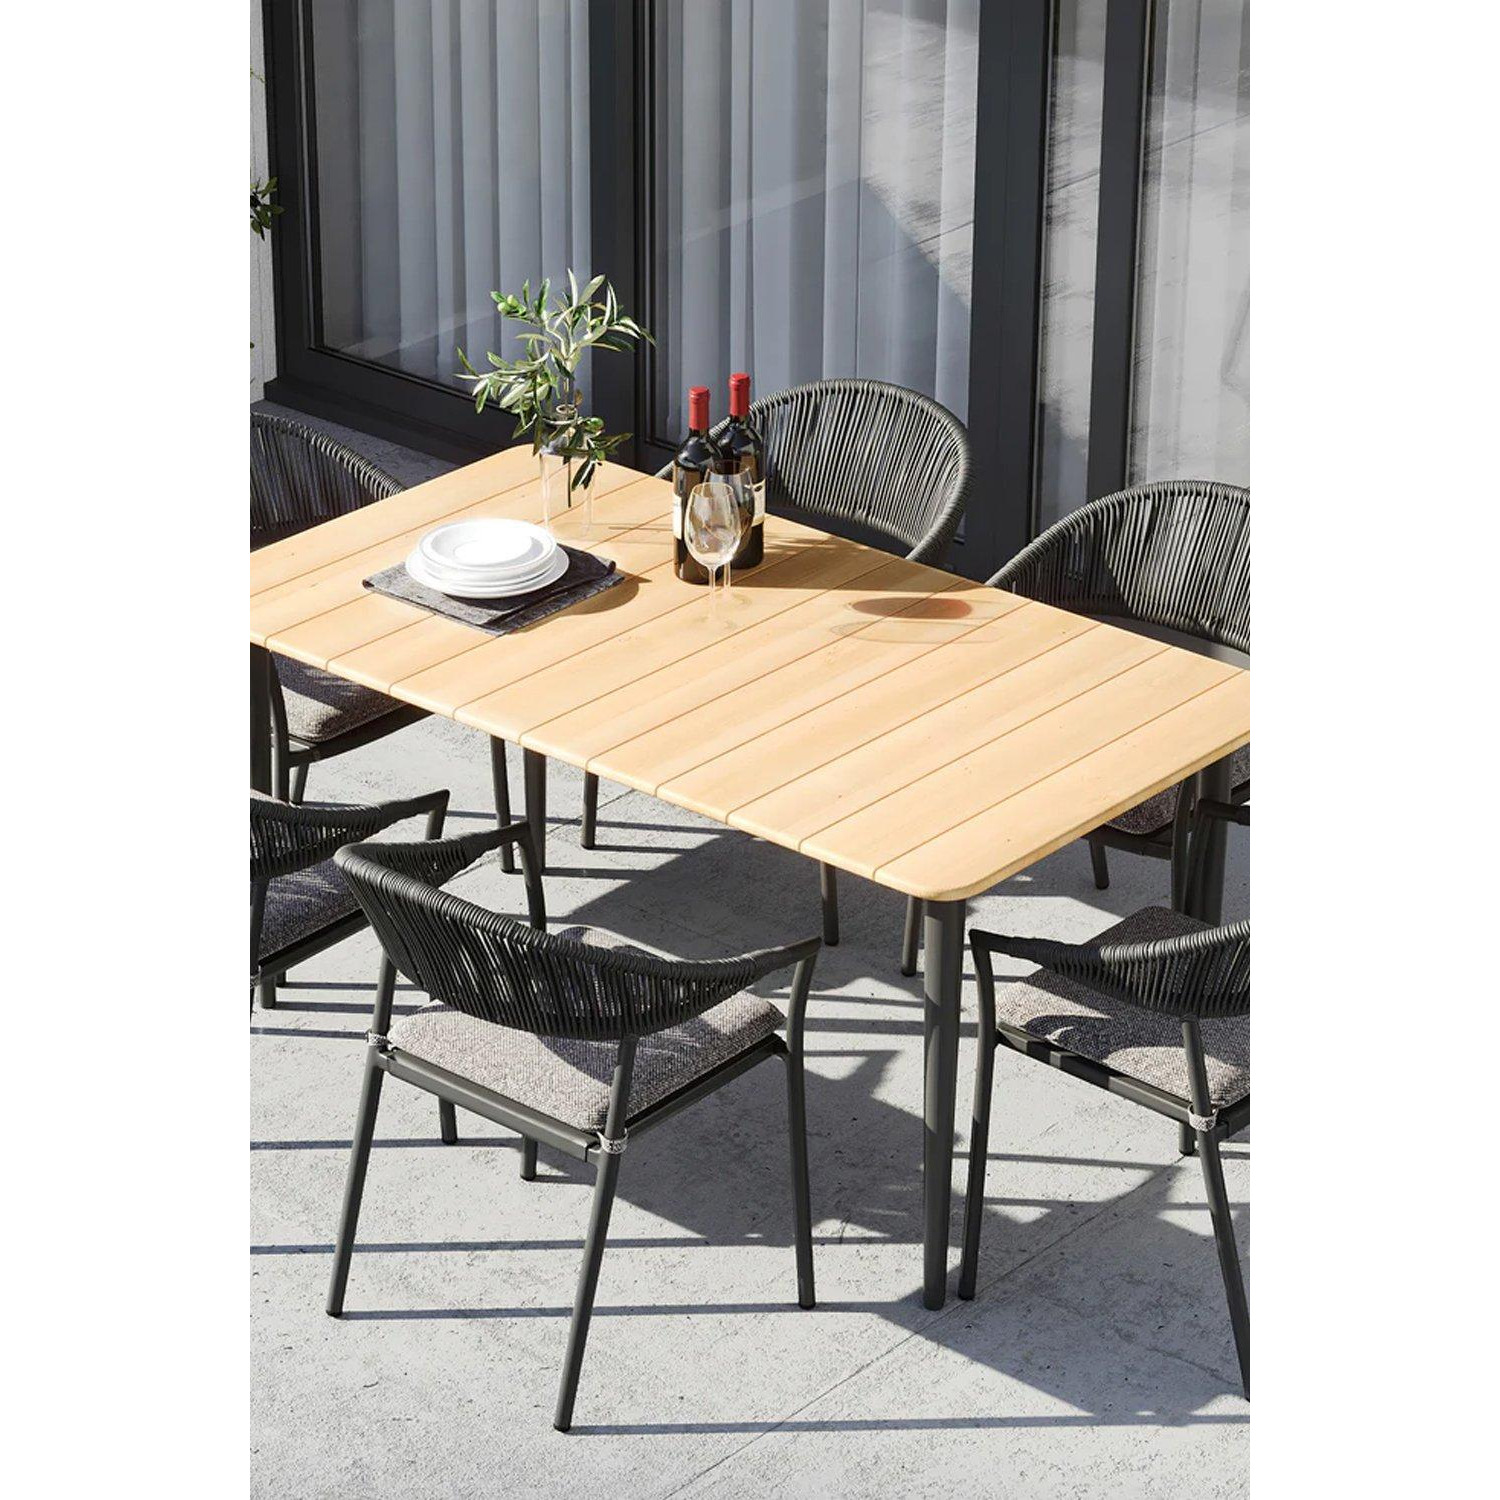 Cloverly 6 Seat Rectangular Dining with Teak Table in Charcoal - image 1